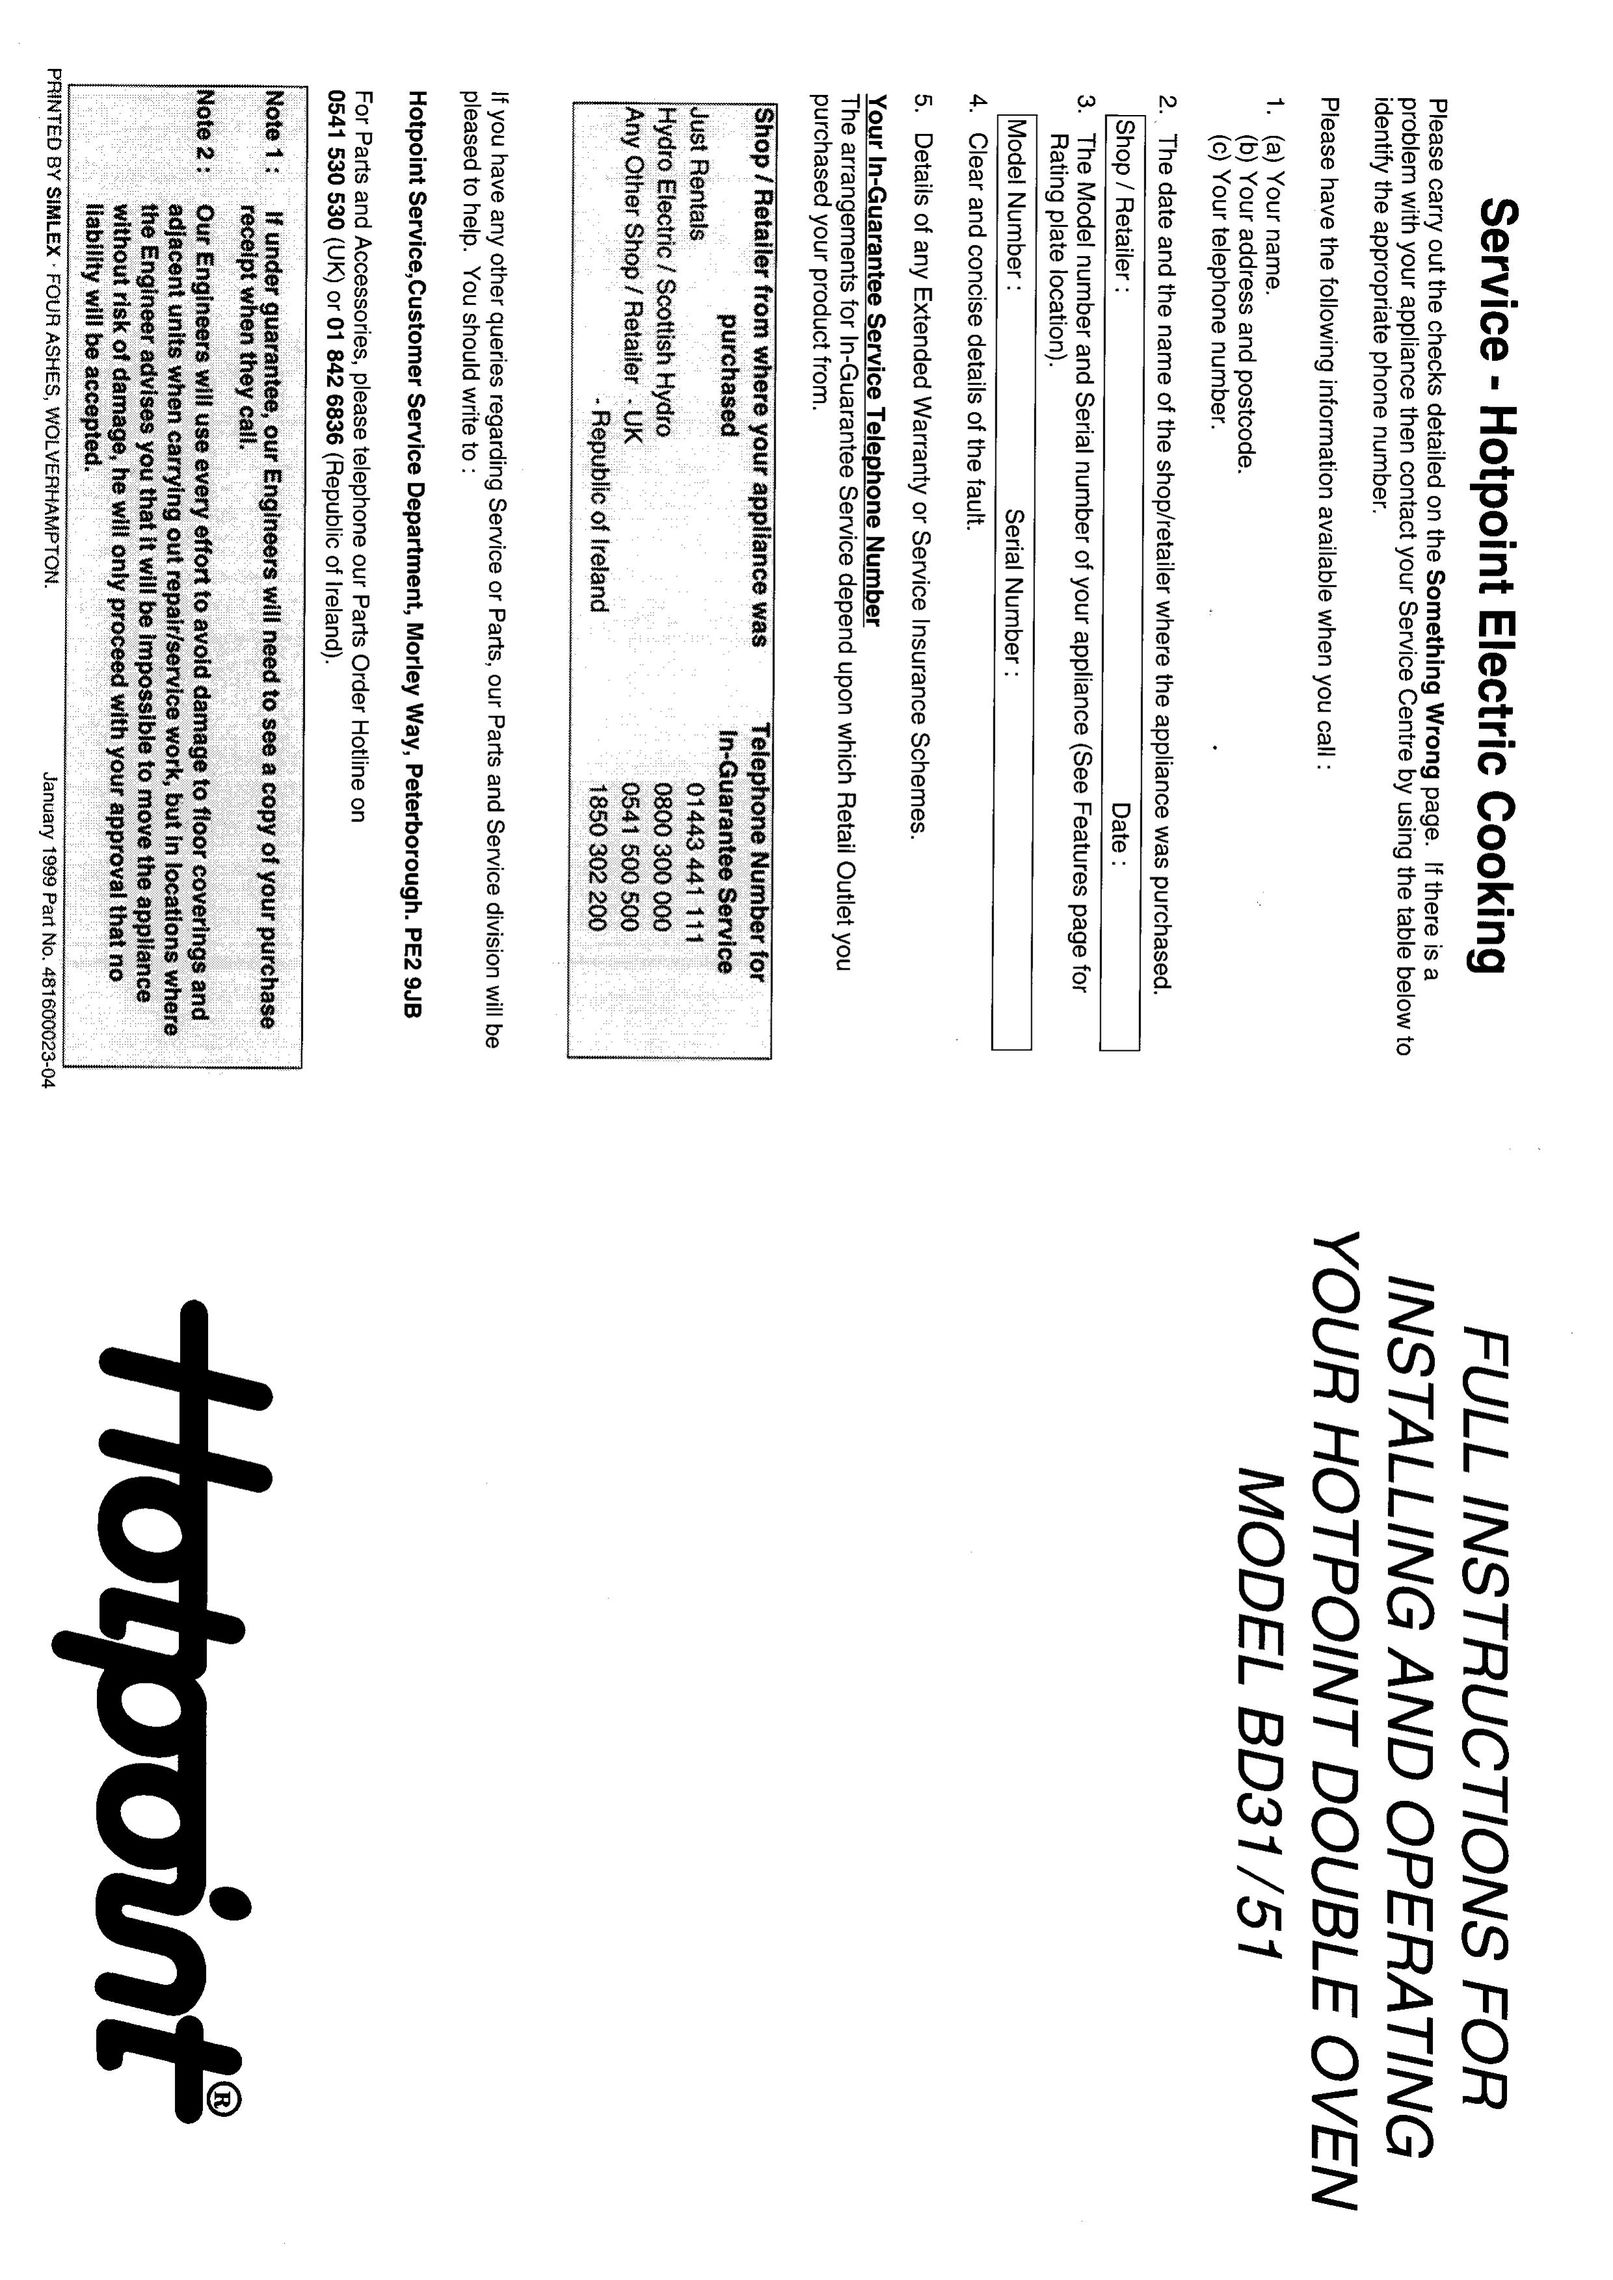 Hotpoint BD31 Double Oven User Manual